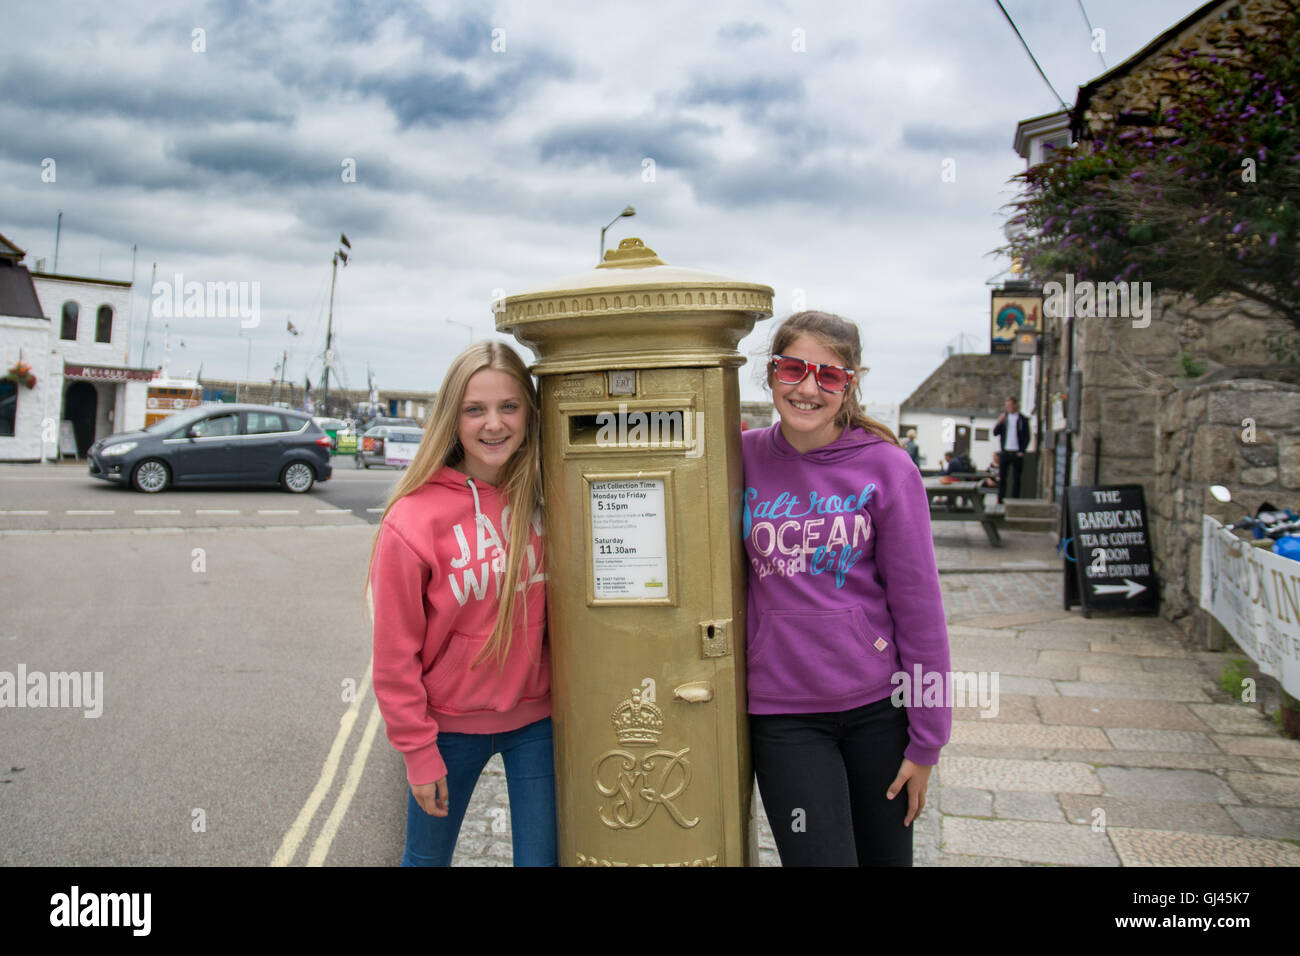 Penzance, Cornwall, UK. 12th August 2016.  The golden postbox in Penzance in honour of Helen Glover winning gold in the 2012 Olympics.Helen and her partner  Heather Stanning have successfully defended their title winning another gold medal.  Seen here Kitty and Lana Credit: © Simon Maycock/Alamy Live News  Stock Photo